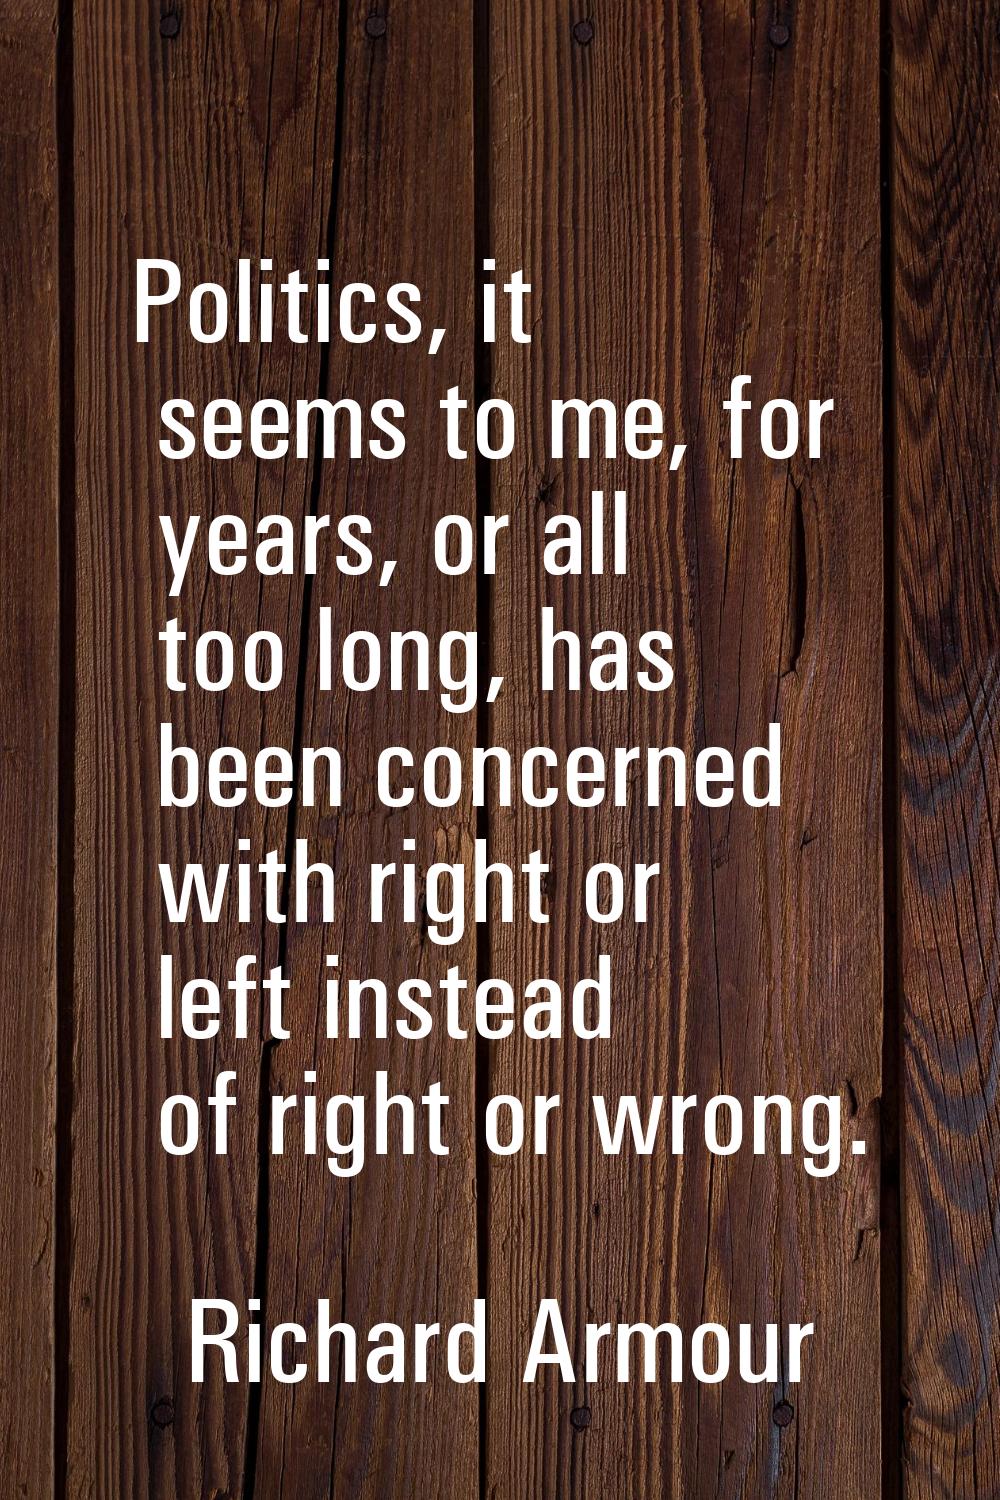 Politics, it seems to me, for years, or all too long, has been concerned with right or left instead